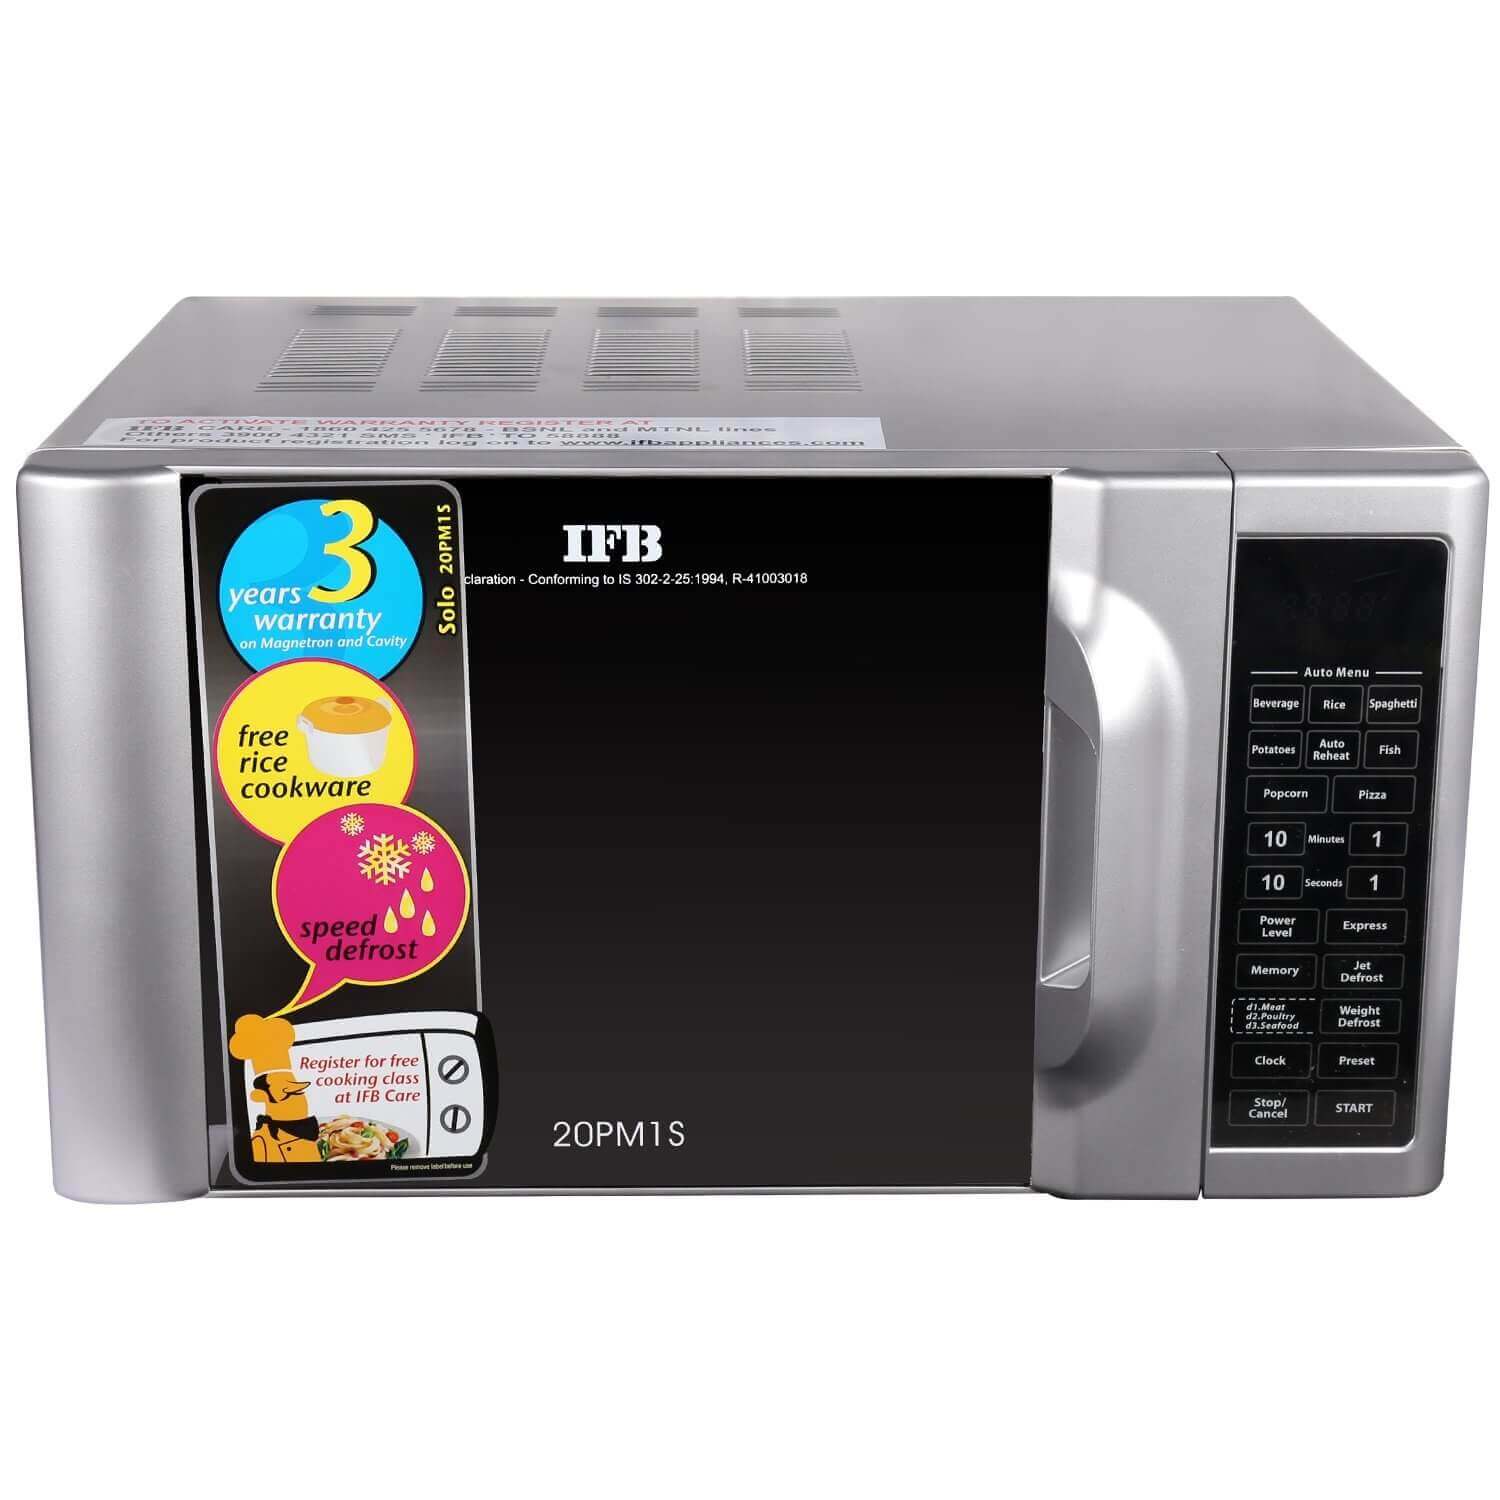 IFB solo Microwave oven